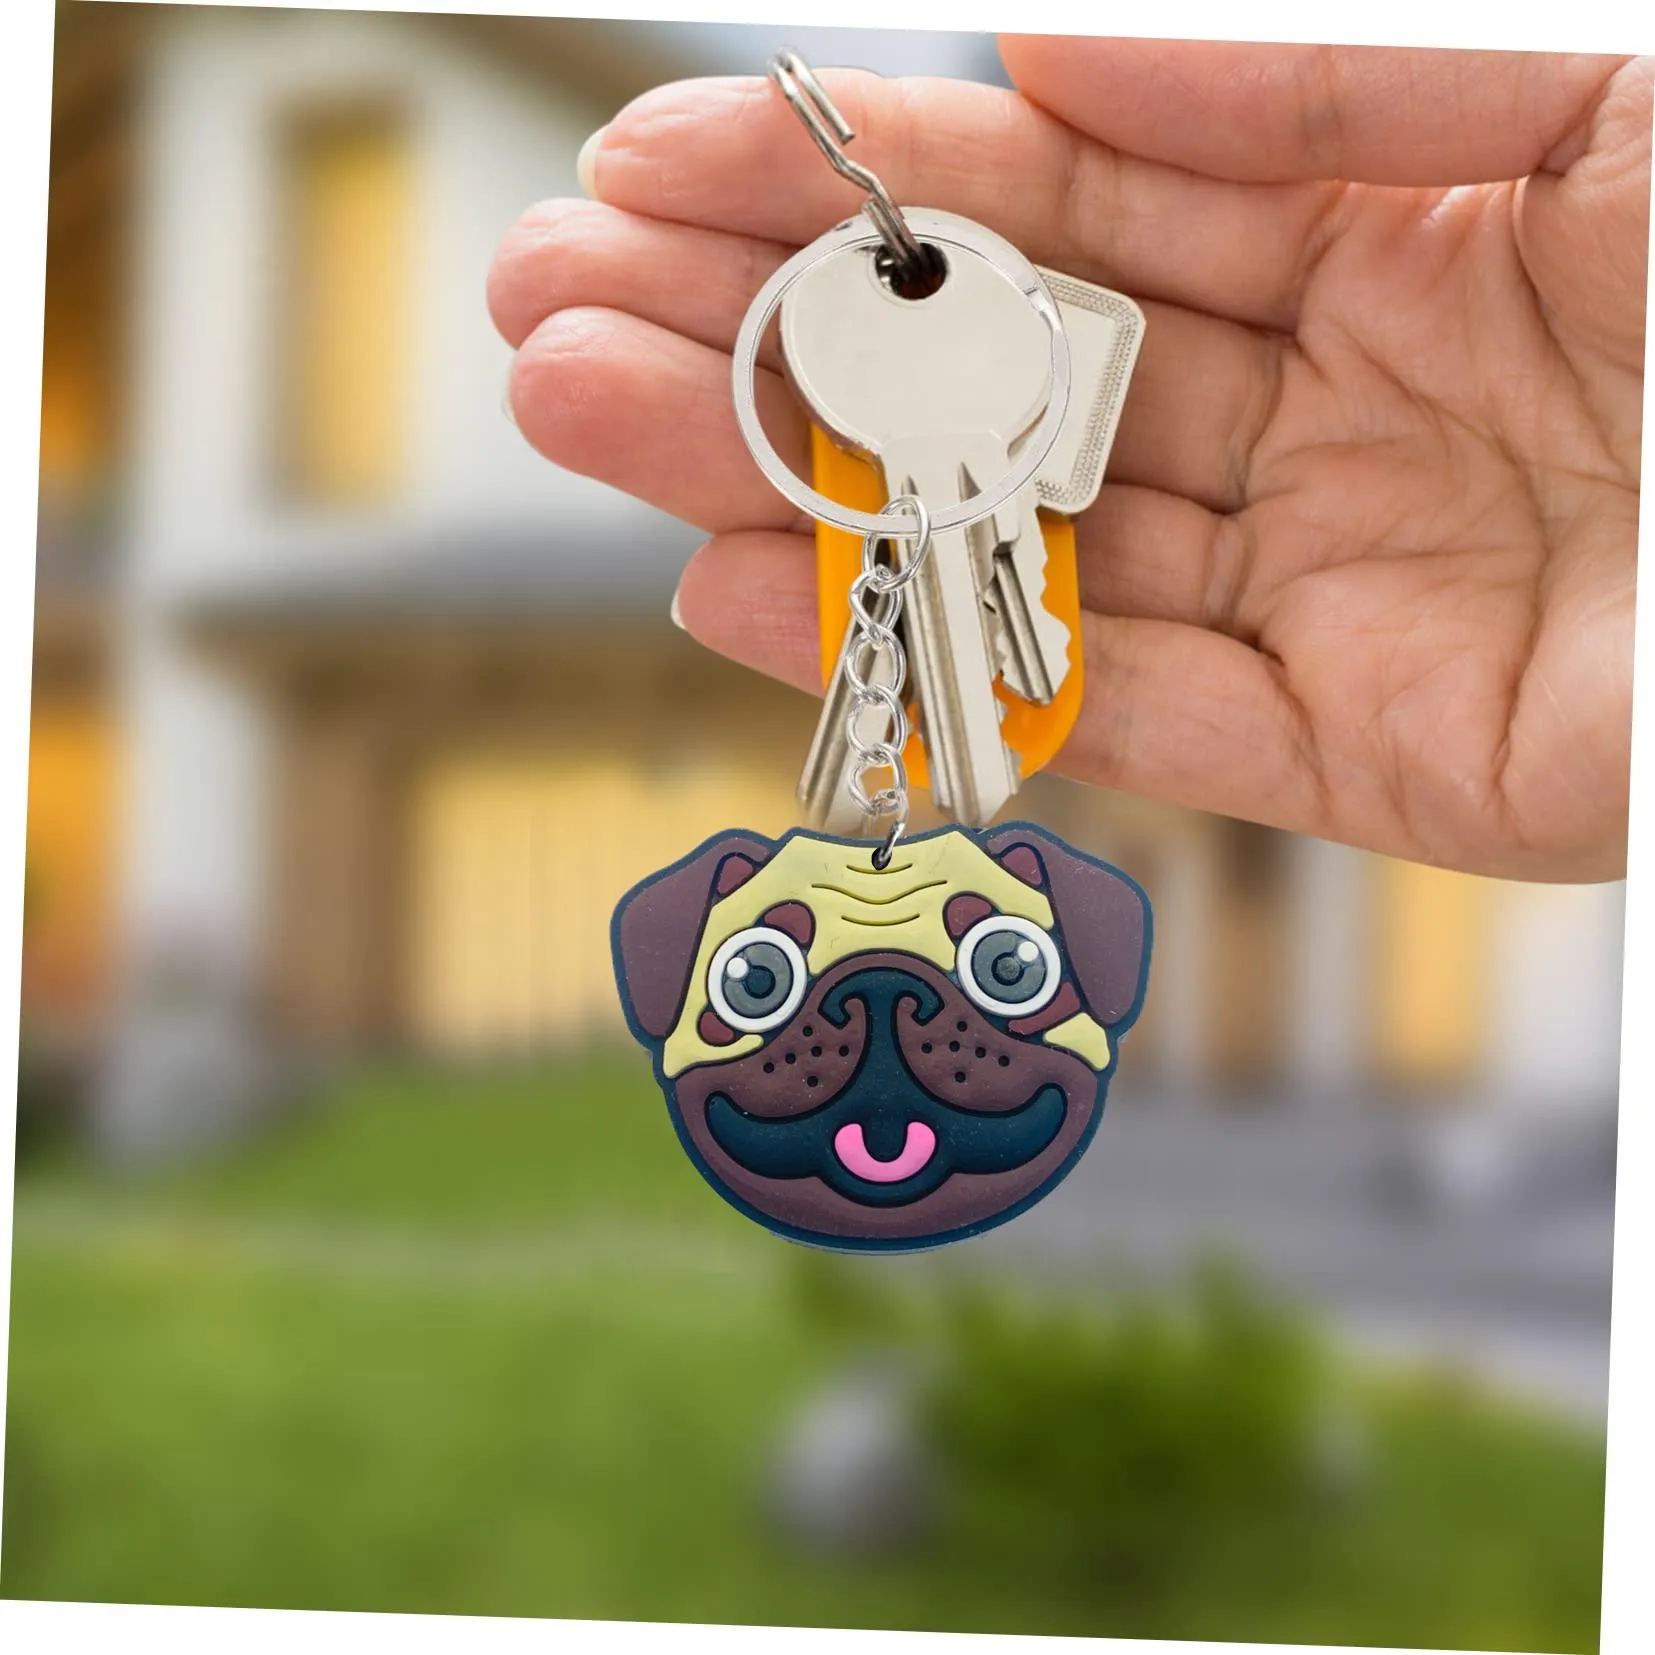 dog series 32 keychain key chain for kid boy girl party favors gift keyring women backpack shoulder bag pendant accessories charm suitable schoolbag keychains rings ring girls